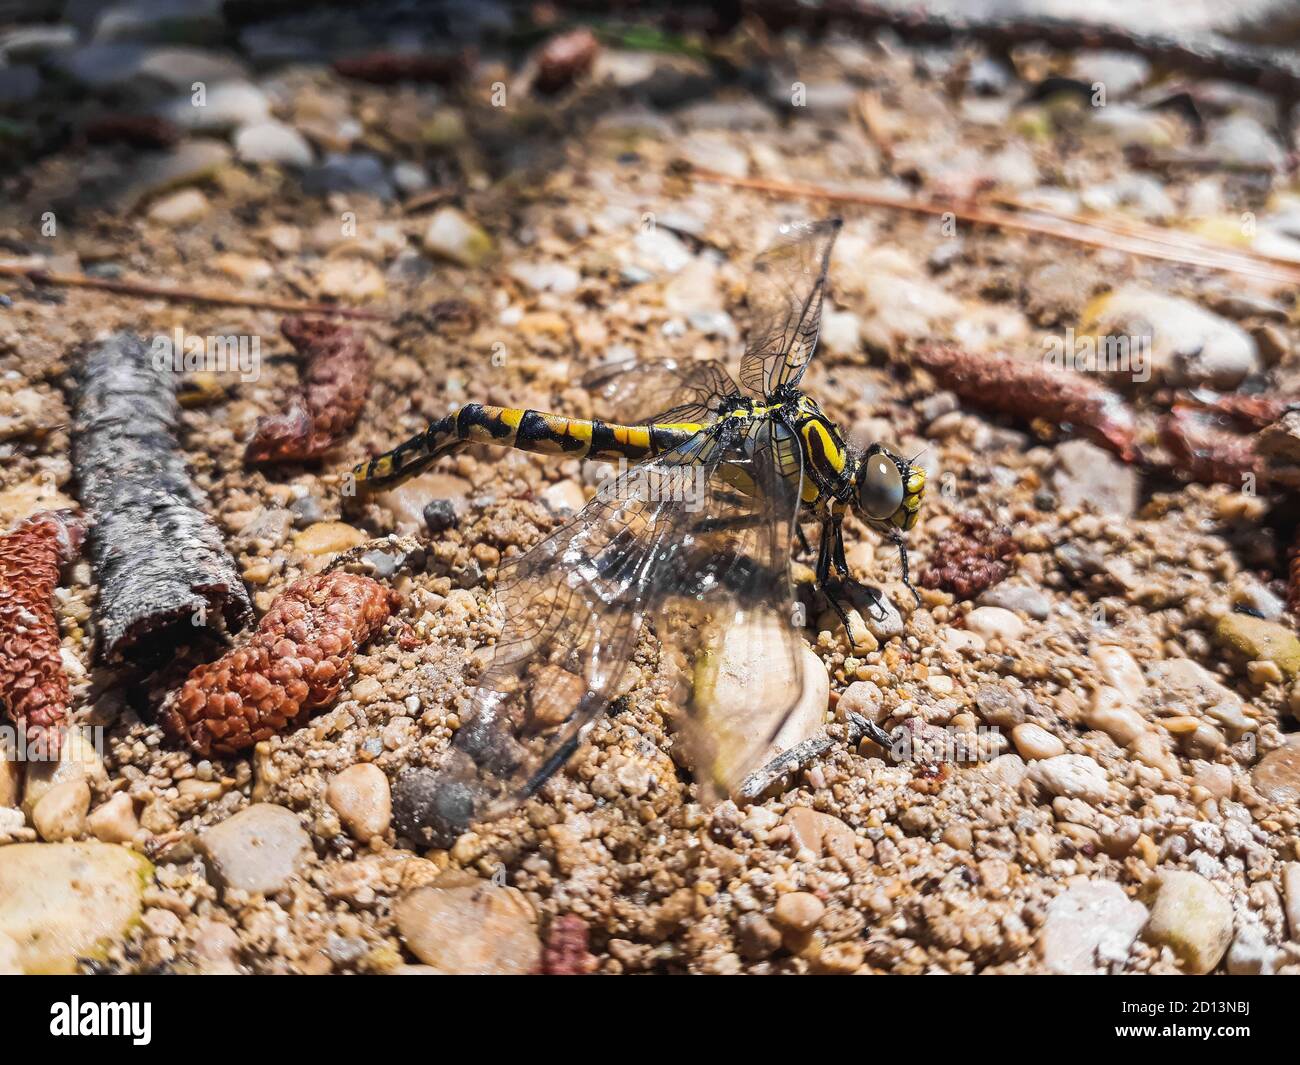 Atrigrated dragonfly -Gomphus simillimus- perched on the bank of a stream in a Mediterranean area. Stock Photo